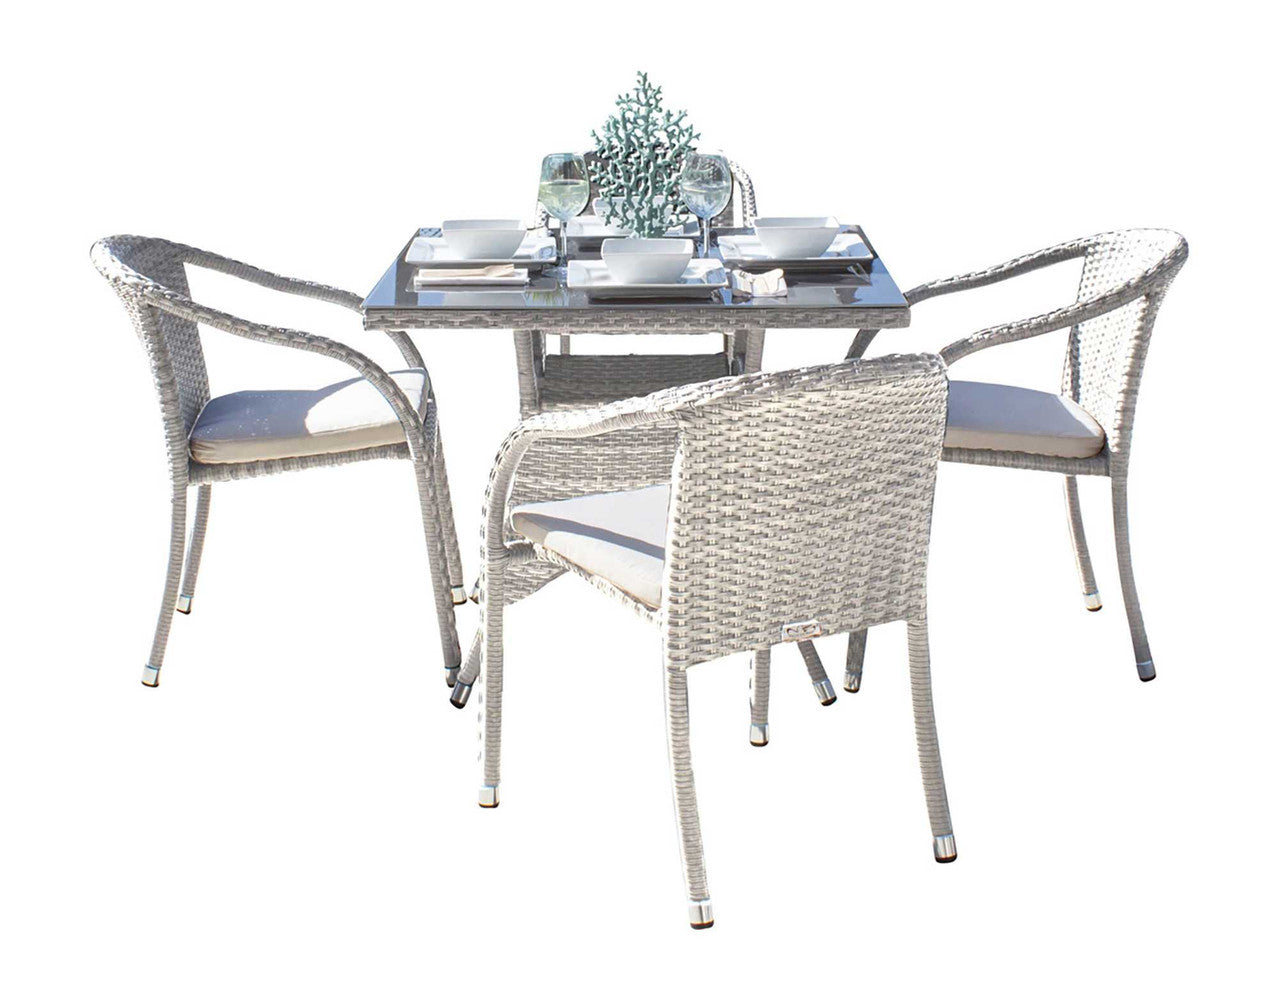 Hospitality Rattan Athens 5 PC Armchair Dining Set with Cushions